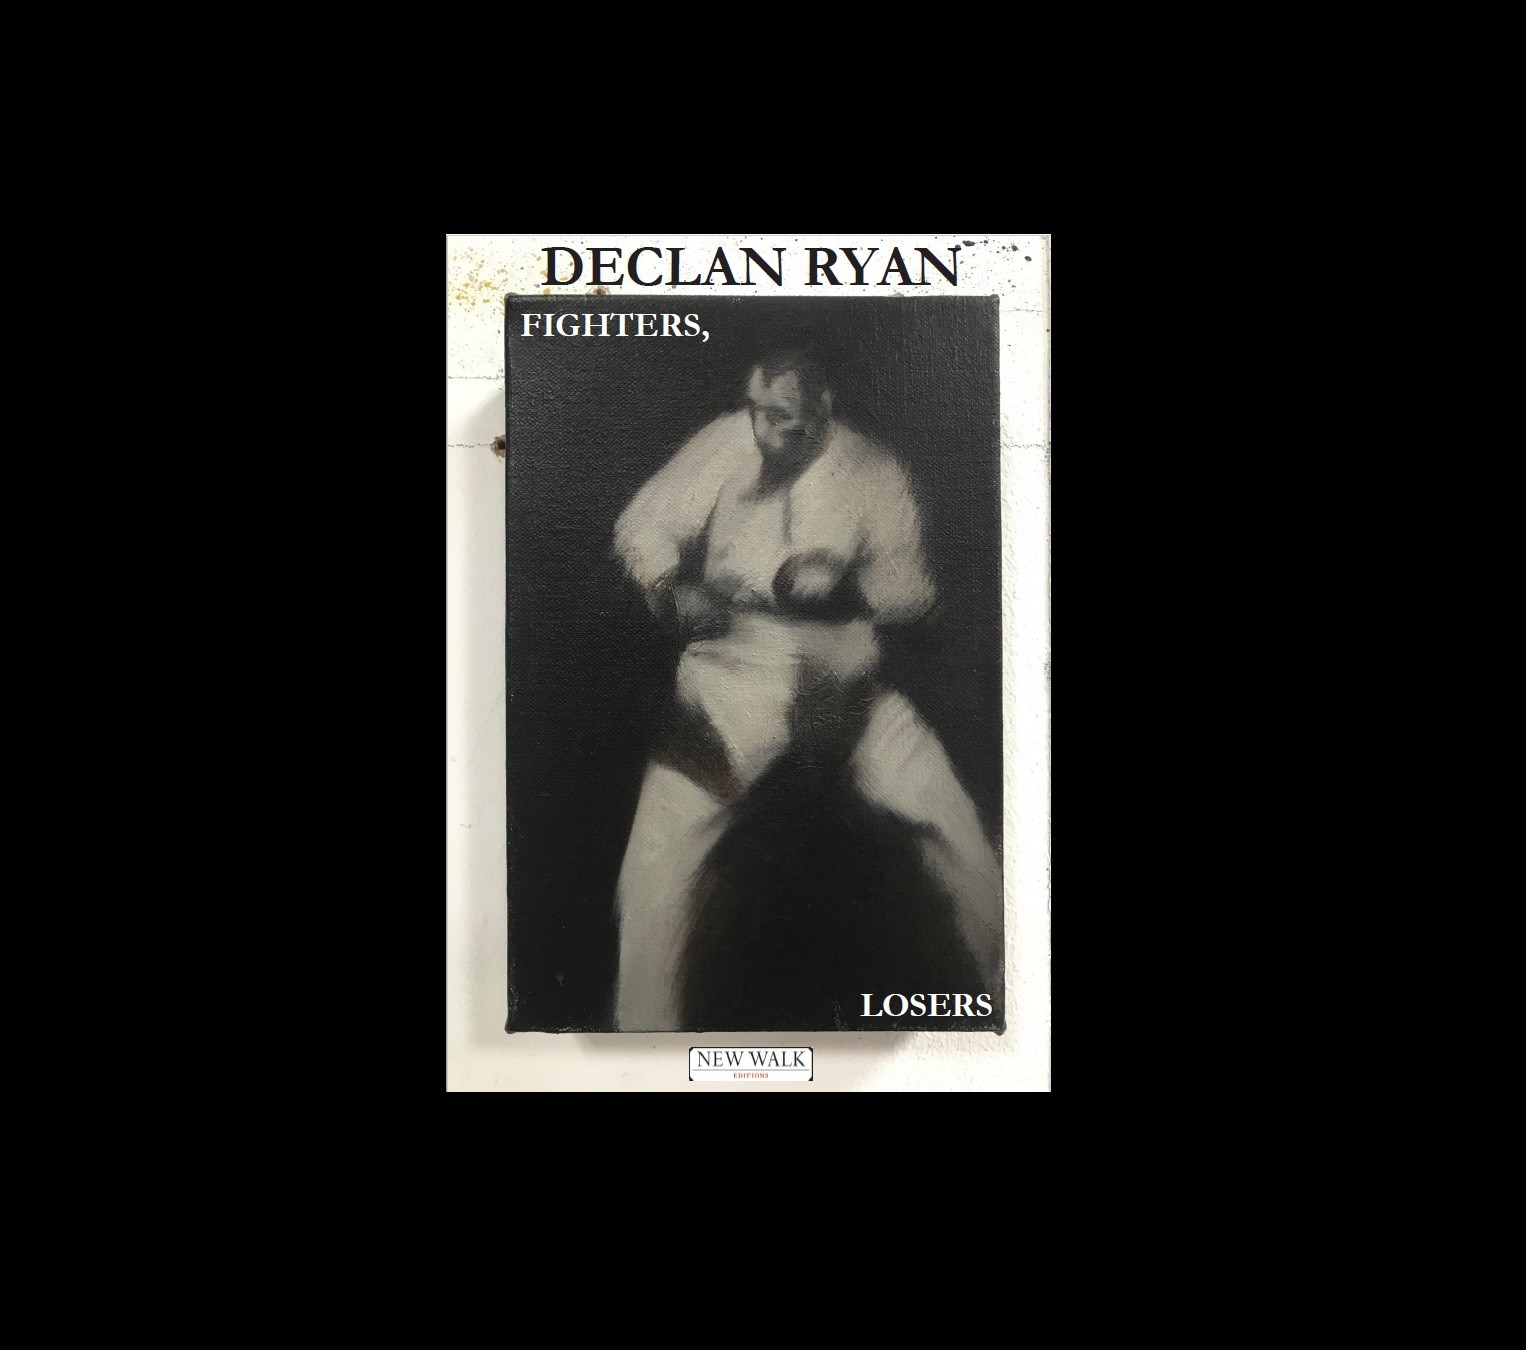 A poem from ‘Fighters, Losers’ by Declan Ryan